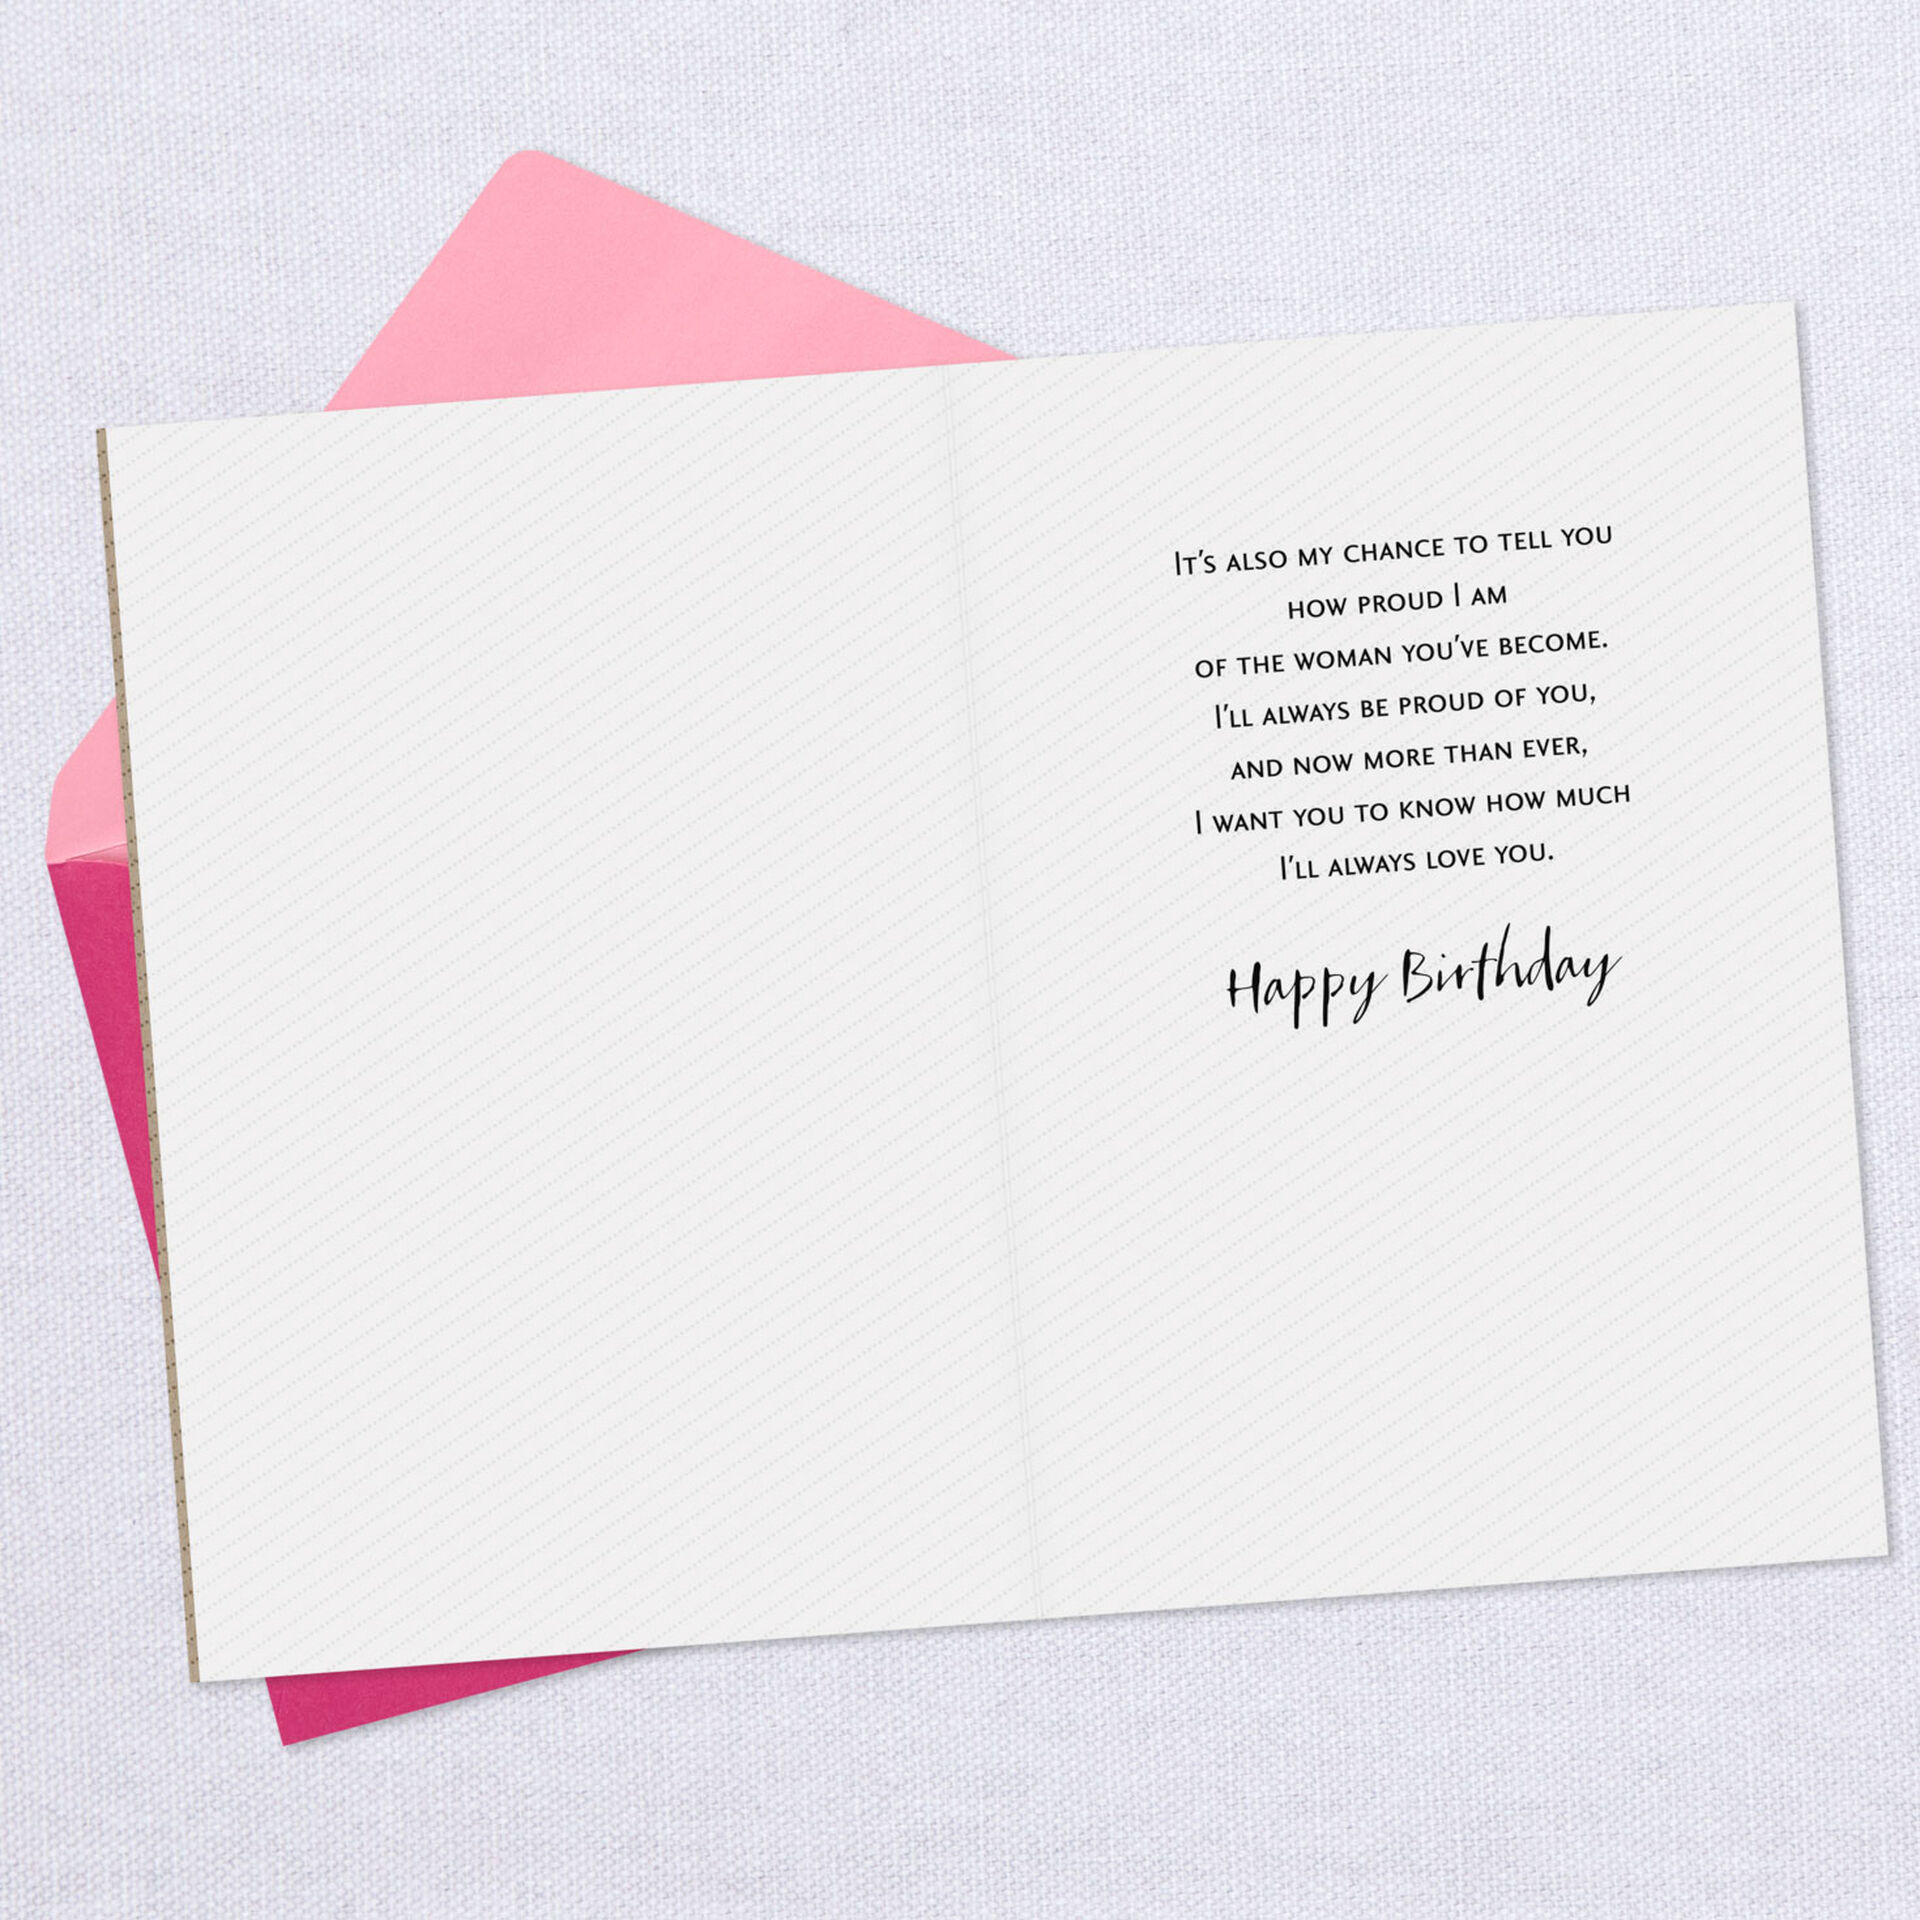 Proud-of-the-Woman-Youve-Become-Birthday-Card_299MHB1638_03